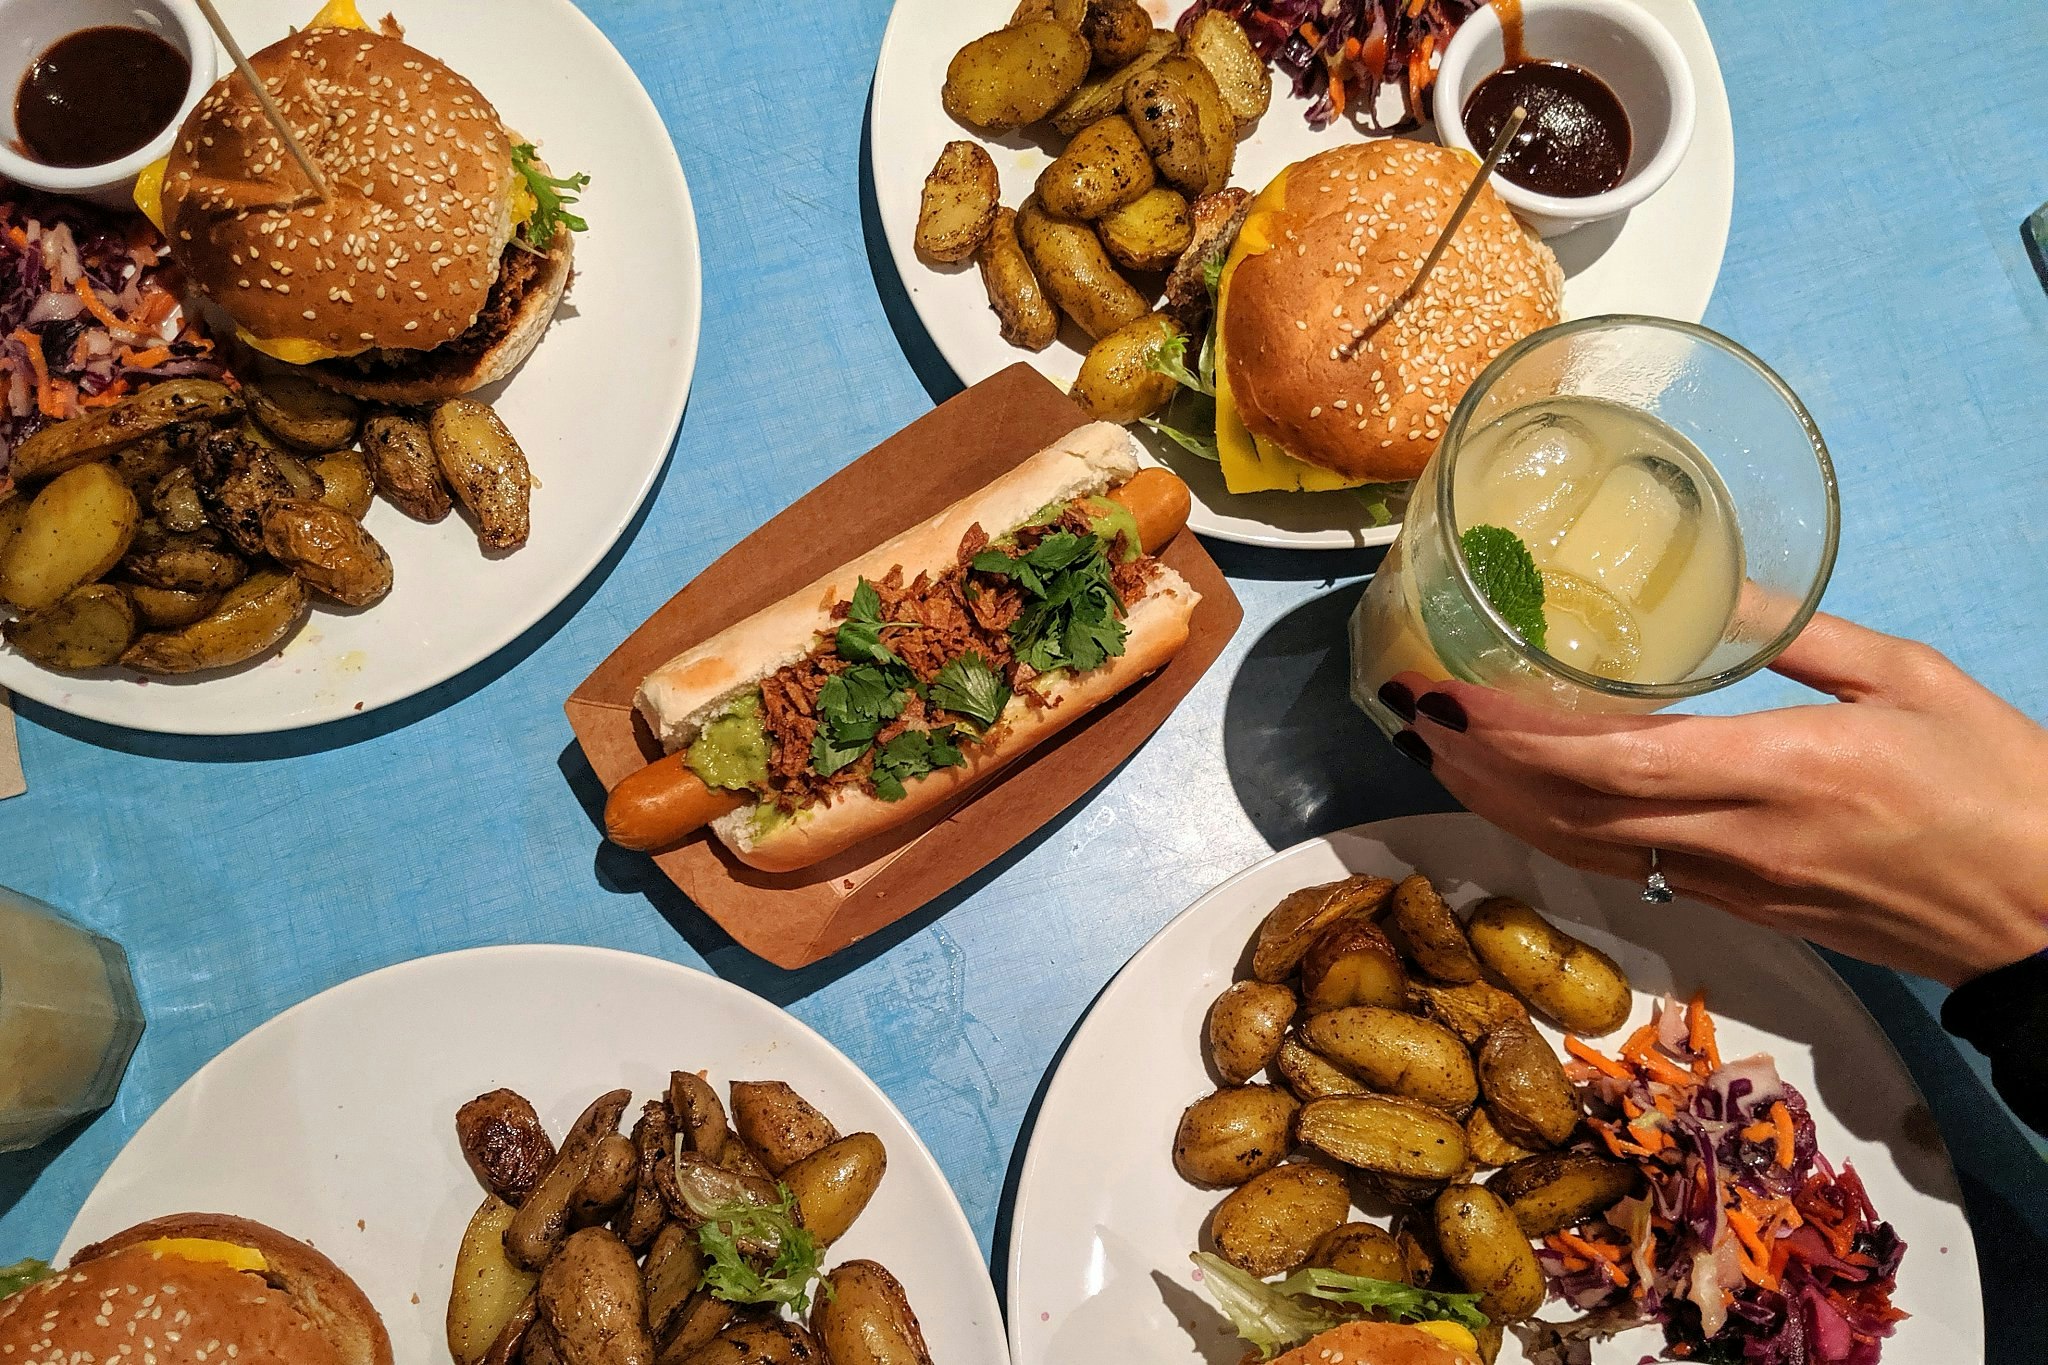 Plates of vegan burgers with potatoes and slaw, plus a vegan hot dog, on a blue tabletop.